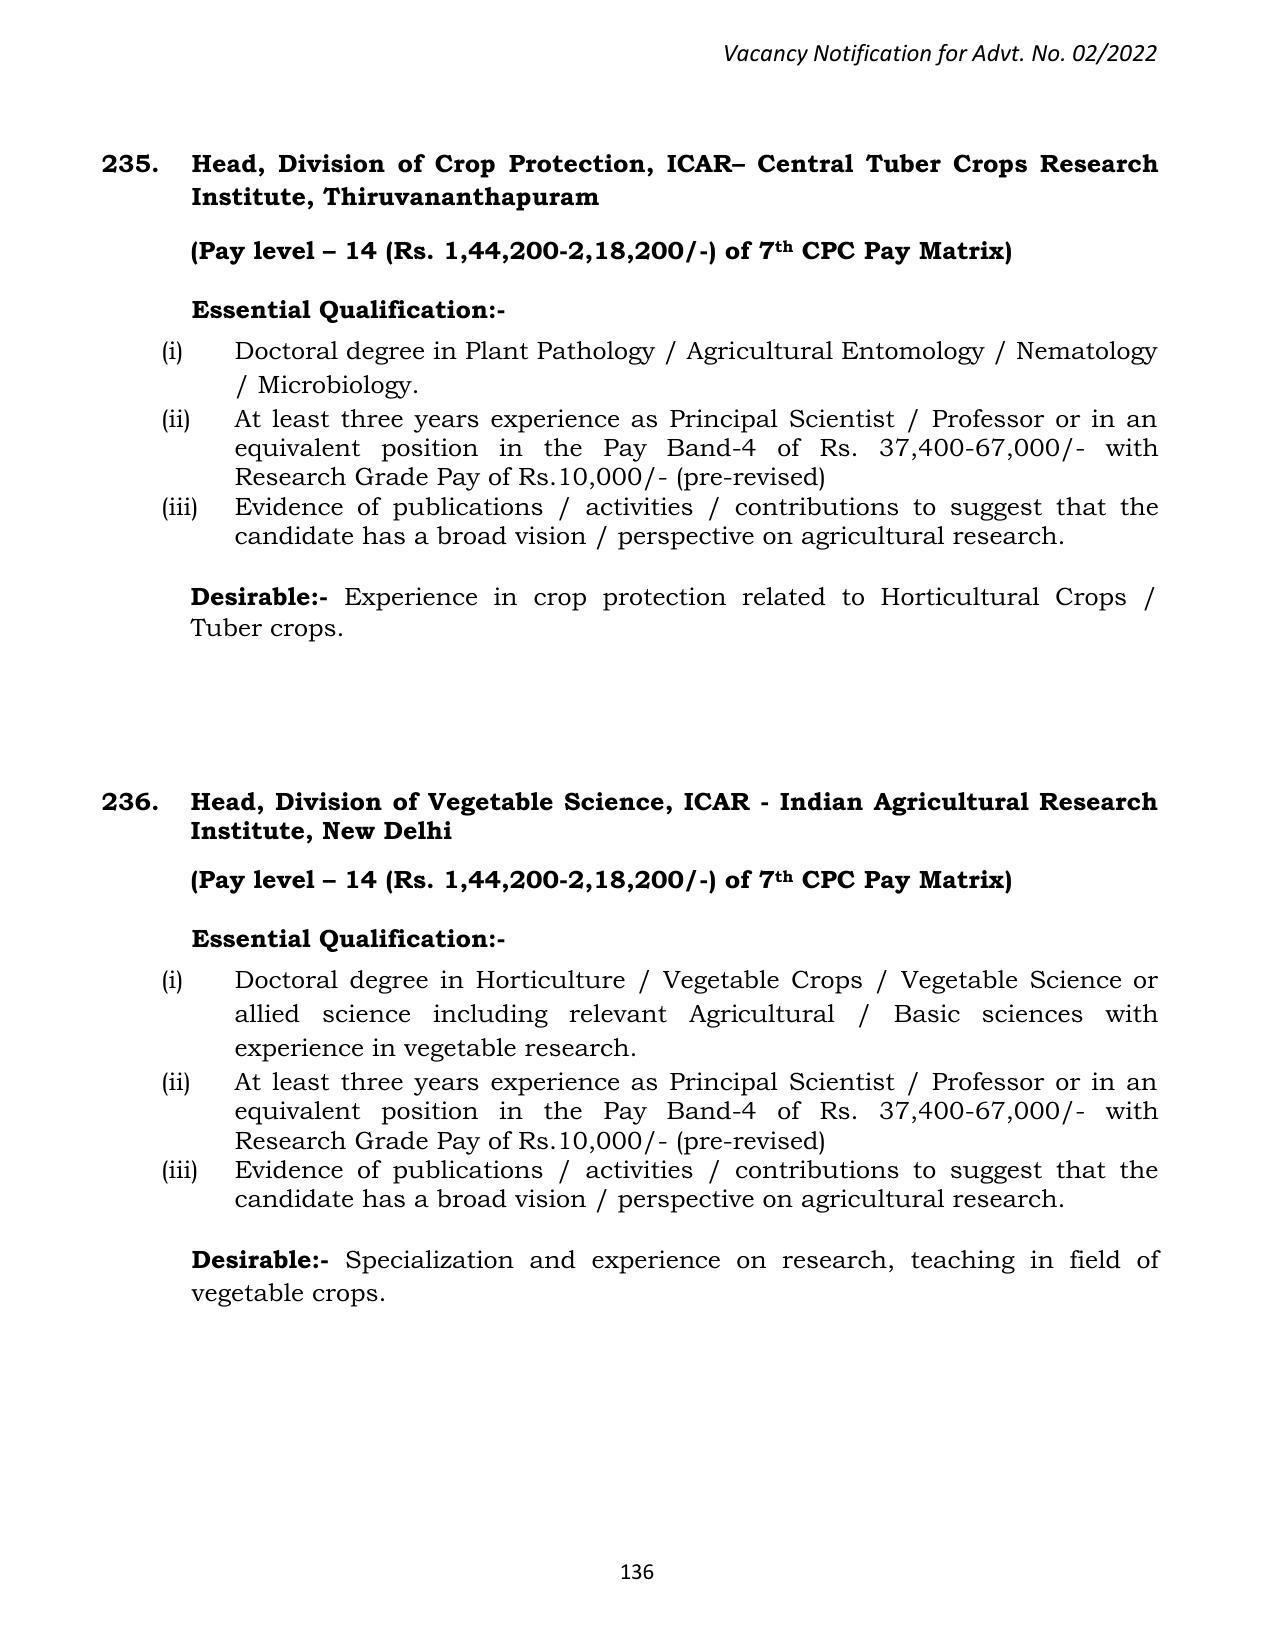 ASRB Non-Research Management Recruitment 2022 - Page 152